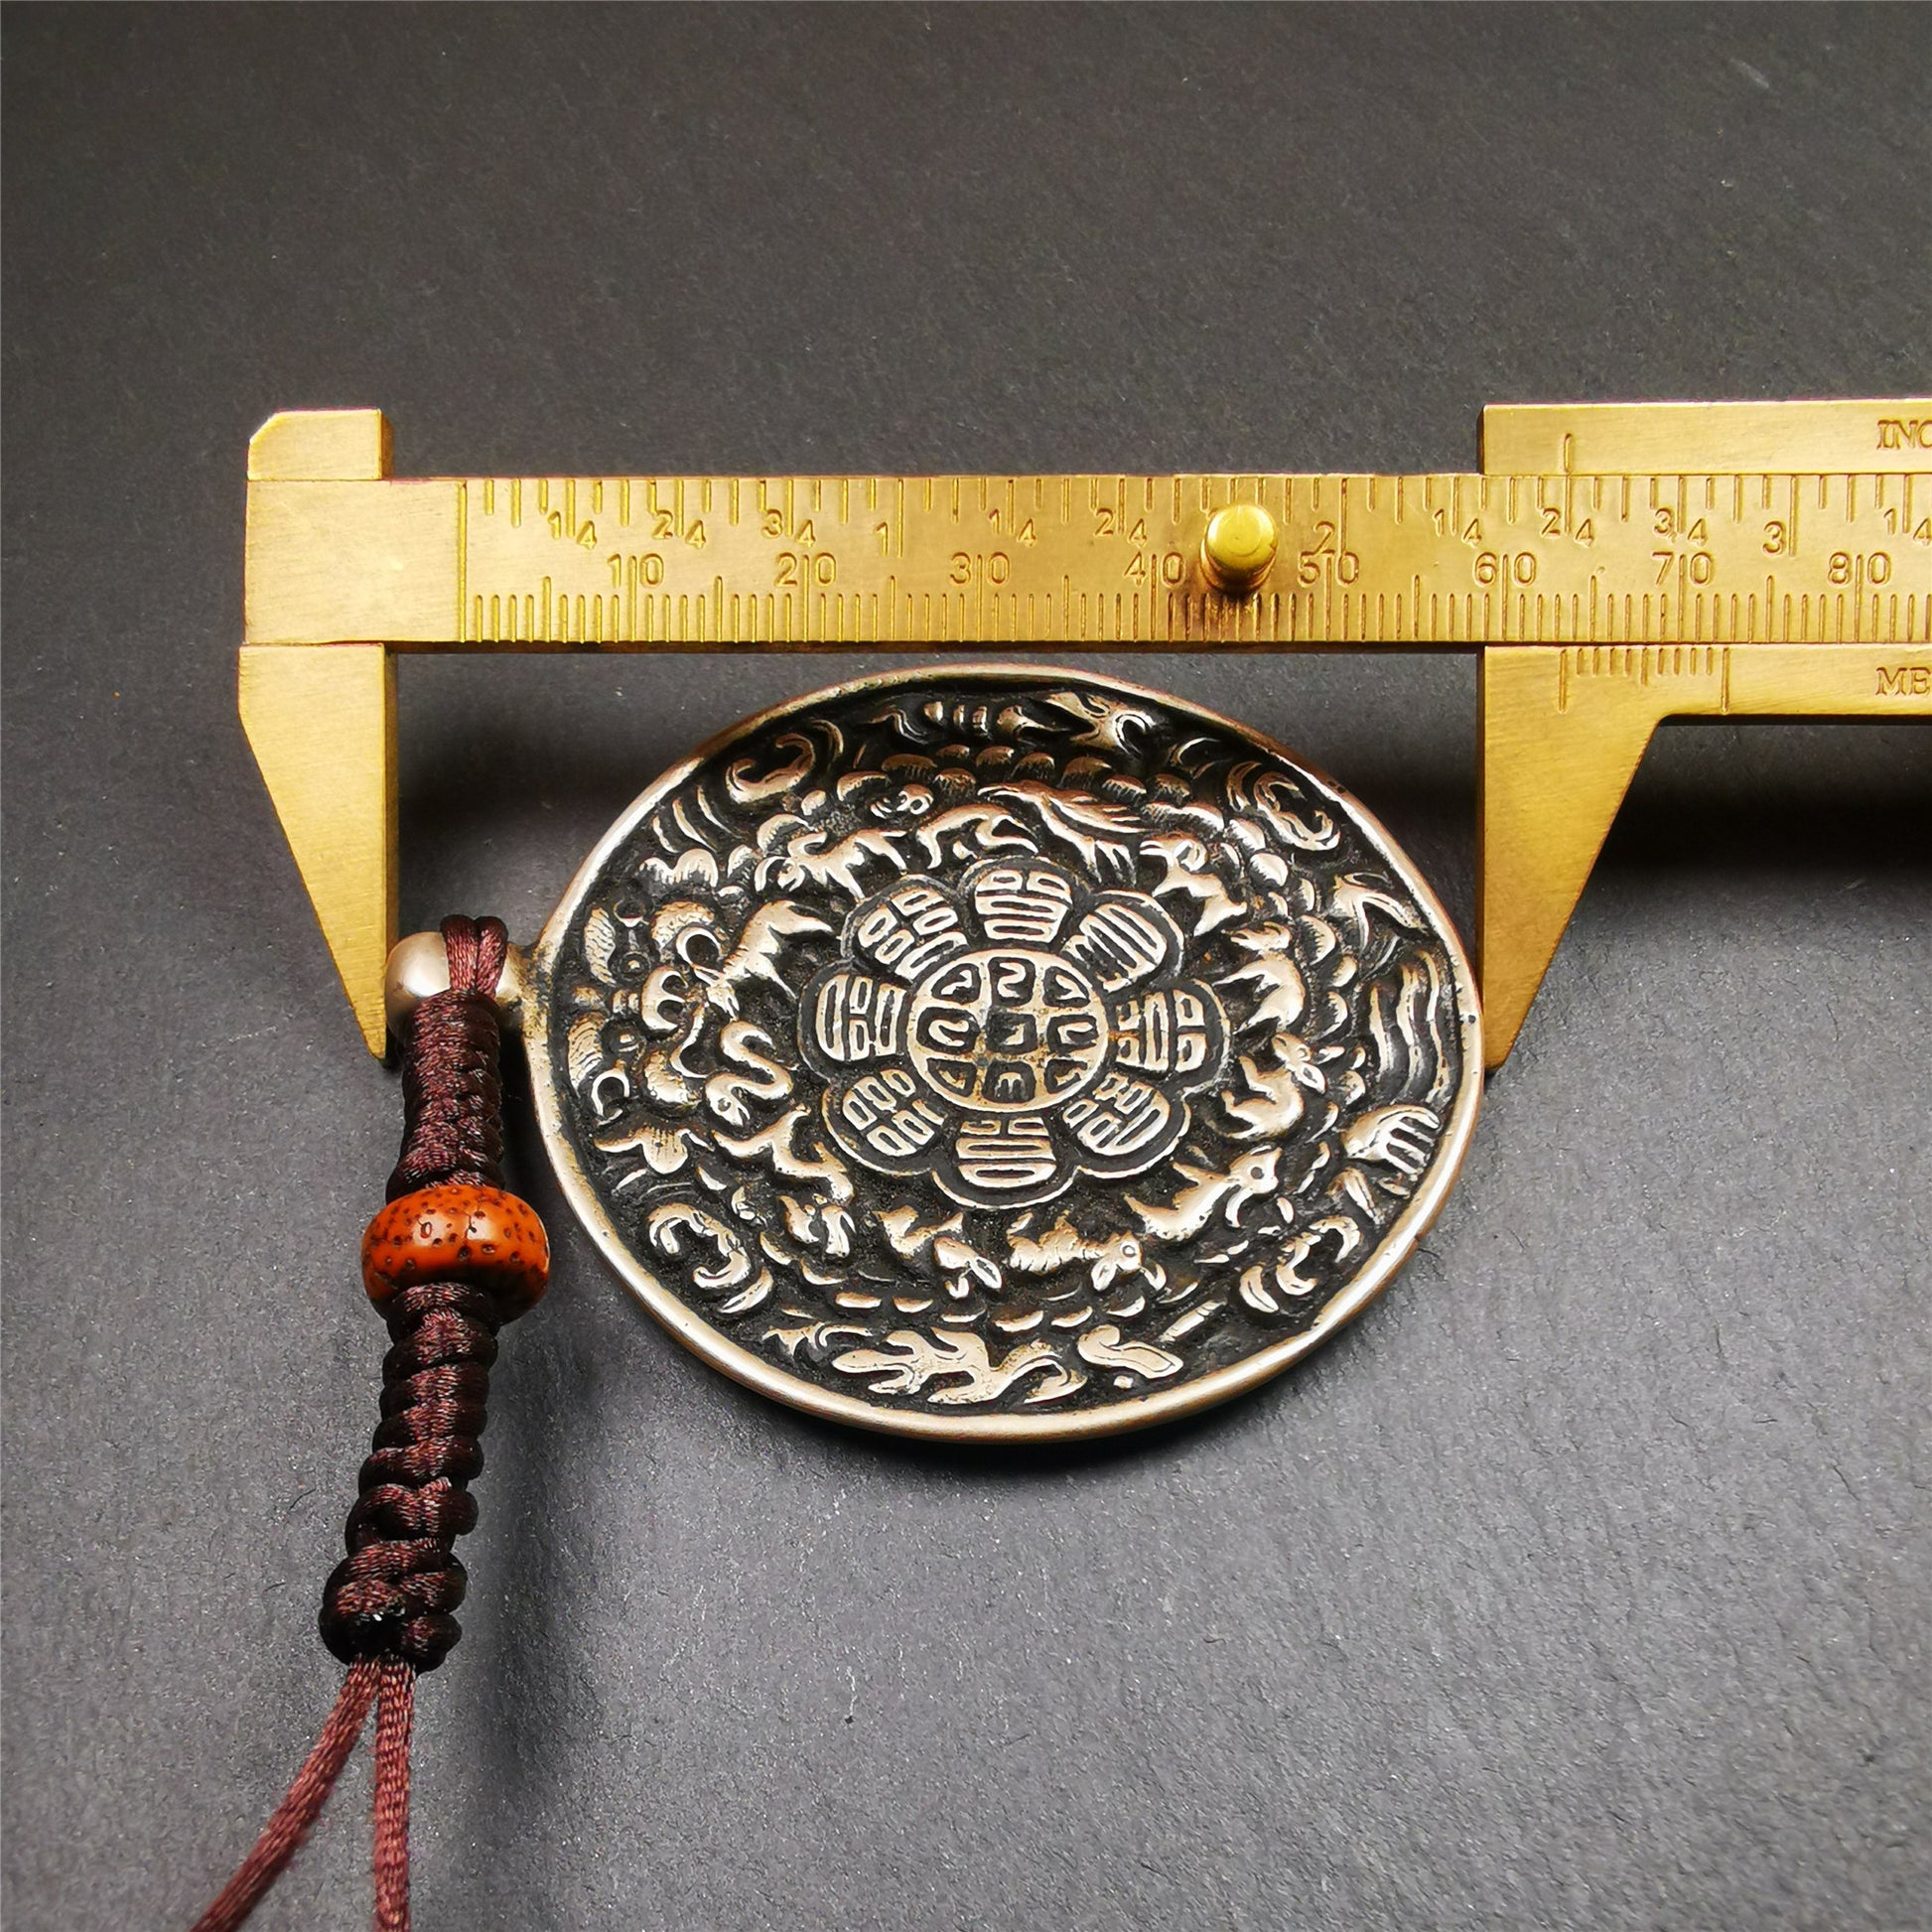 This type of melong amulet was made by Tibetan craftsmen and come from Hepo Town, Baiyu County, the birthplace of the famous Tibetan handicrafts,blessed by lama from Rejia Monastery,about 30 years old. It is made of lima brass,round shape,2.16 inches